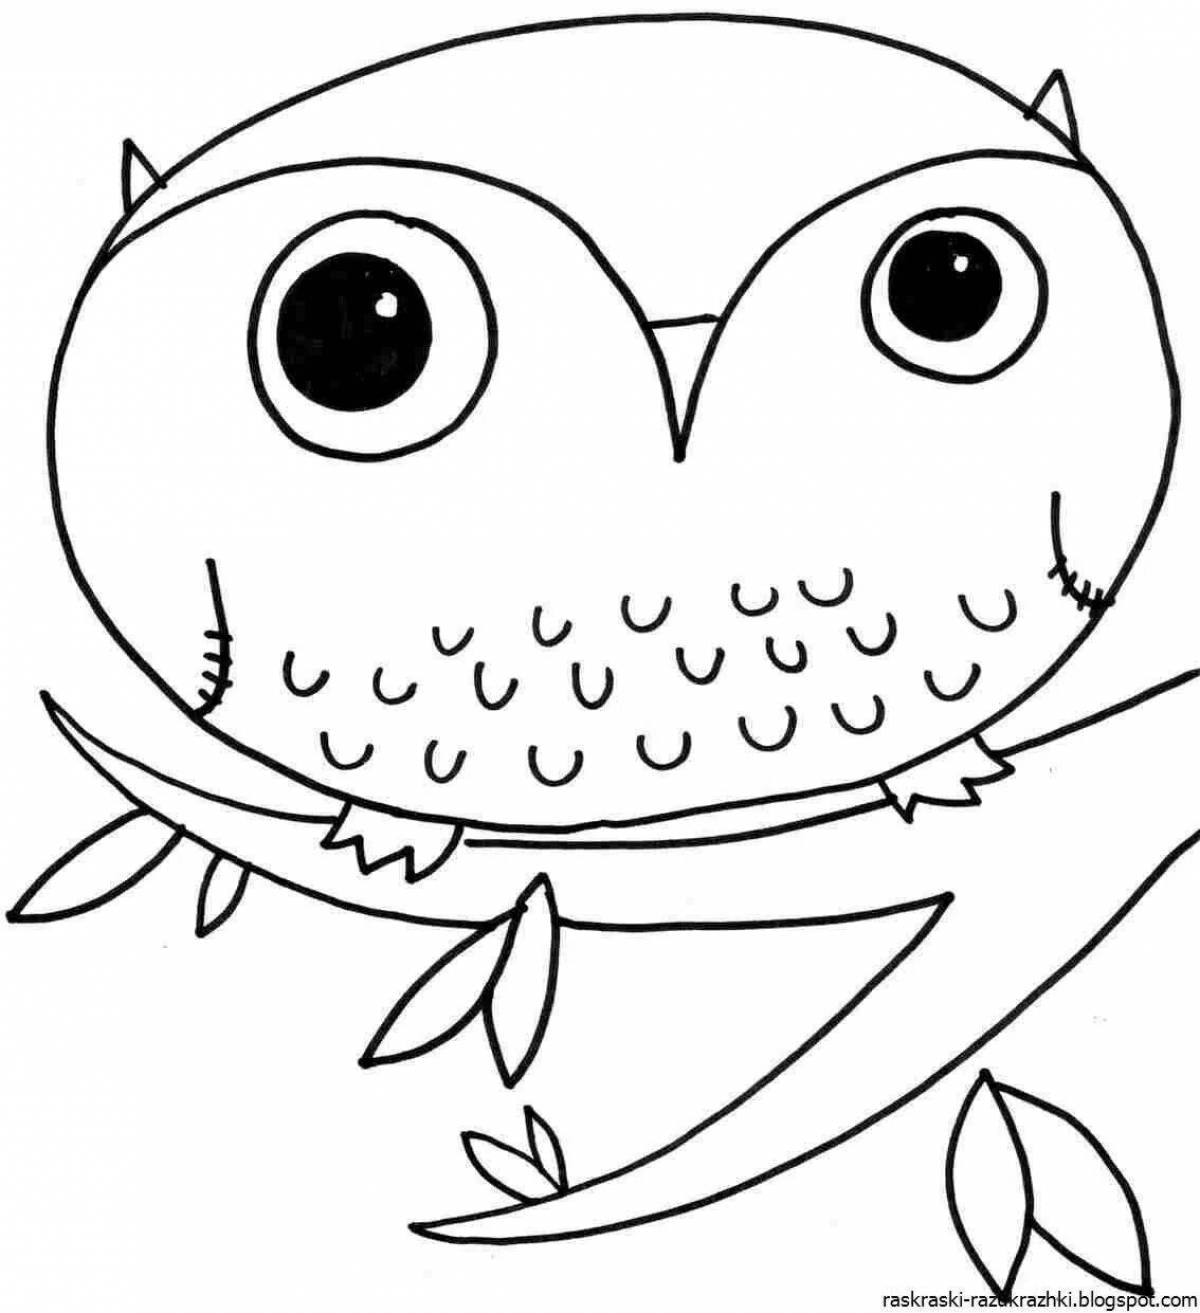 Colourful owl coloring book for kids